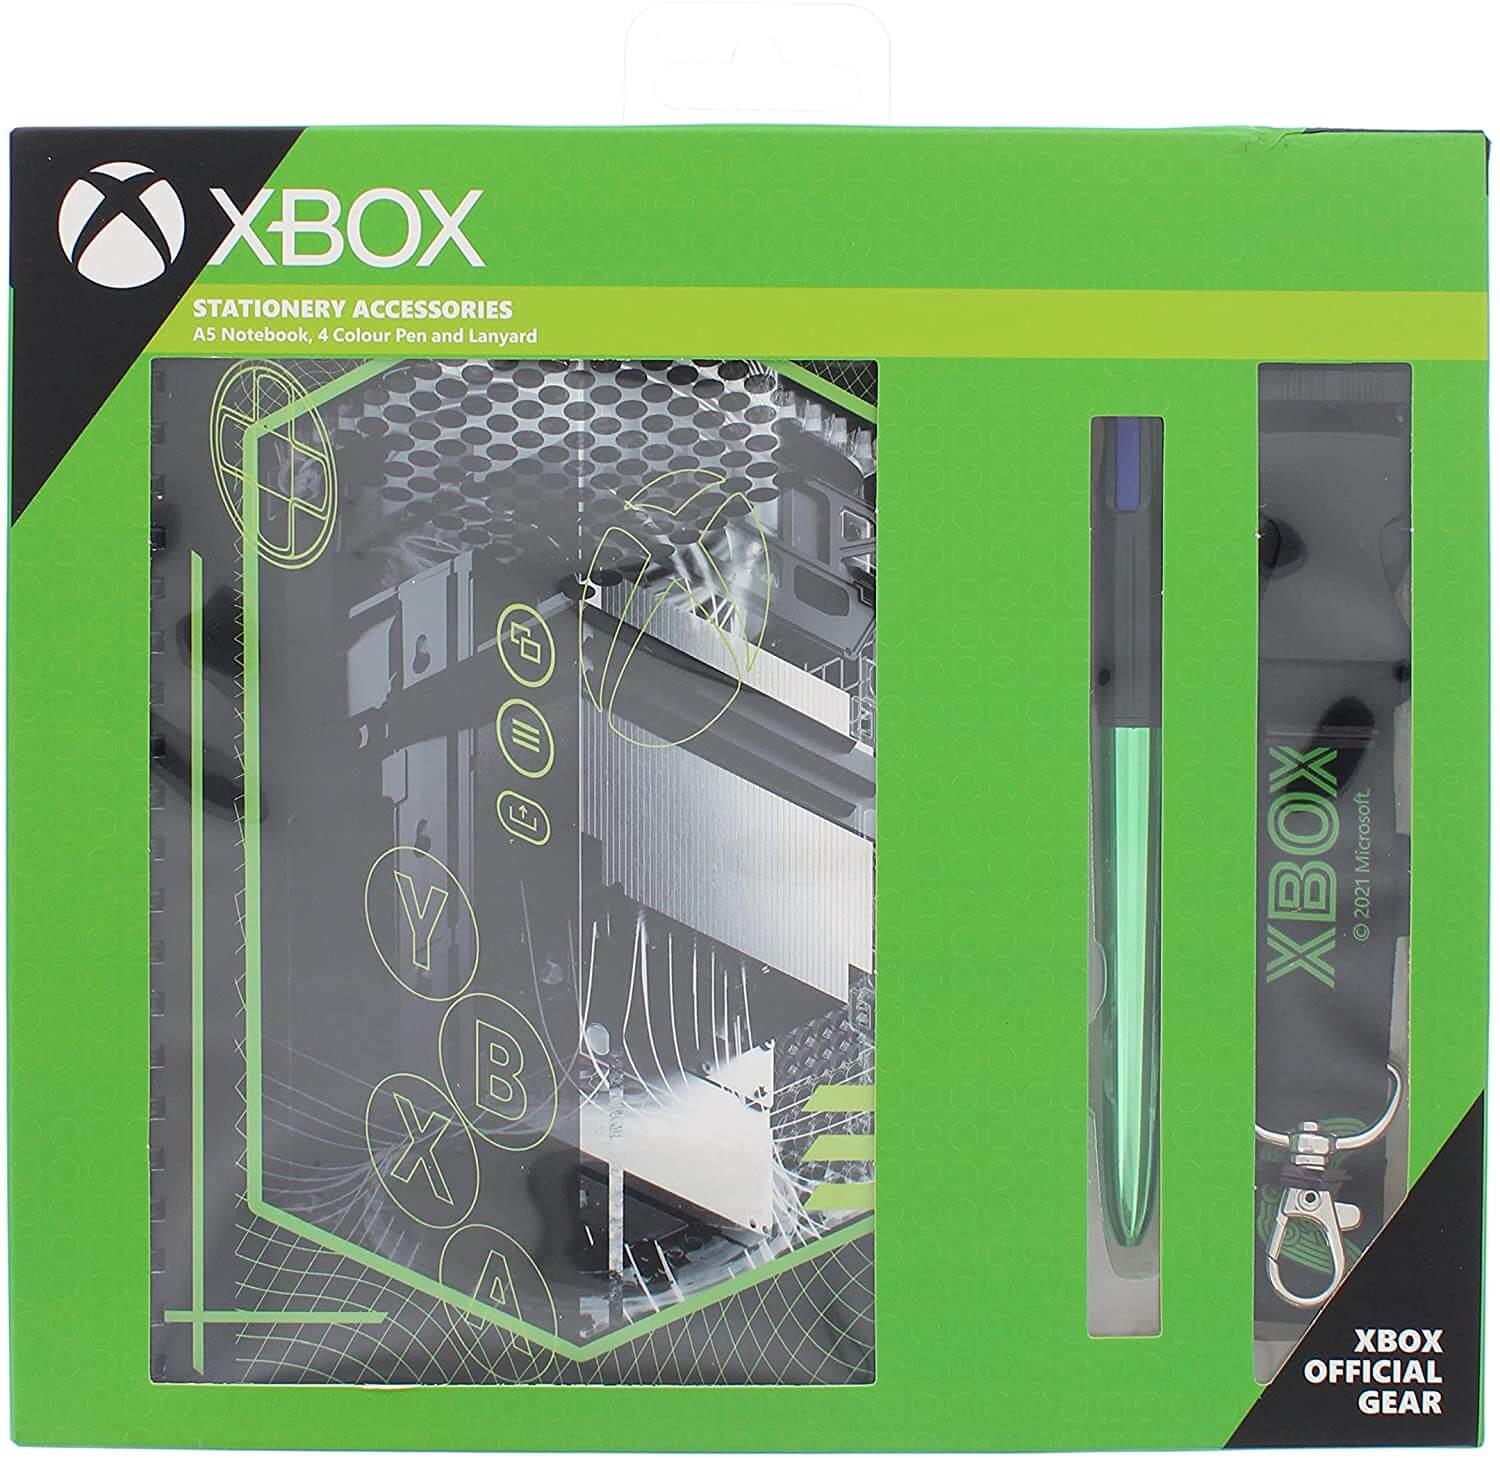 X Box Stationery Accessories Set from Bargain Max